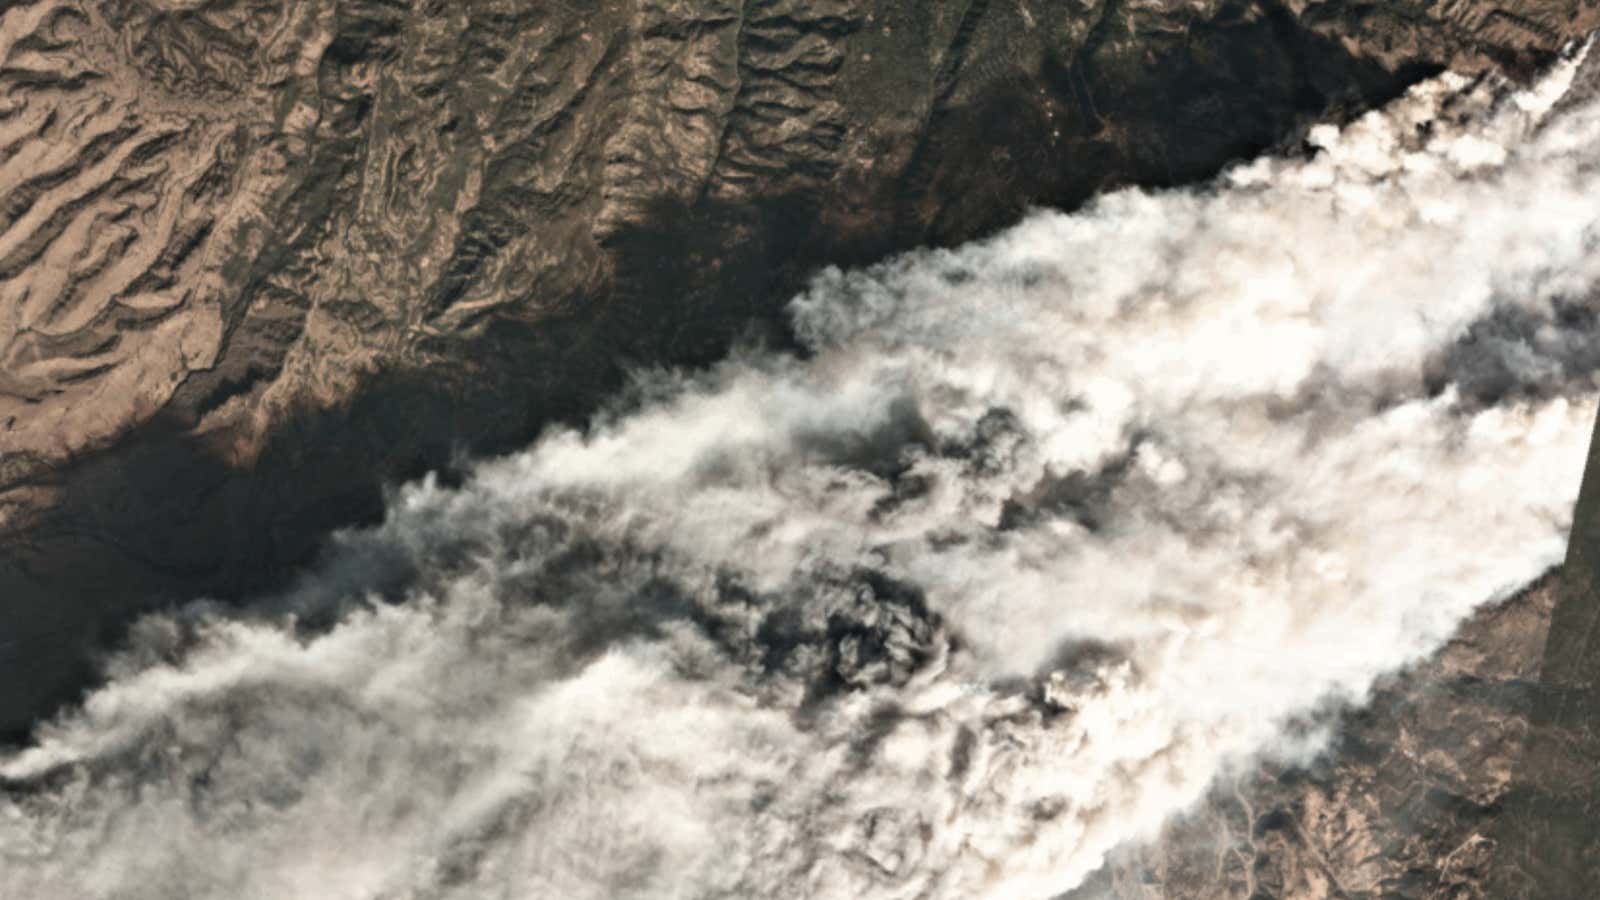 The first satellite image taken of the Camp Fire, at 10:30 am  PT on Nov. 8 2018.